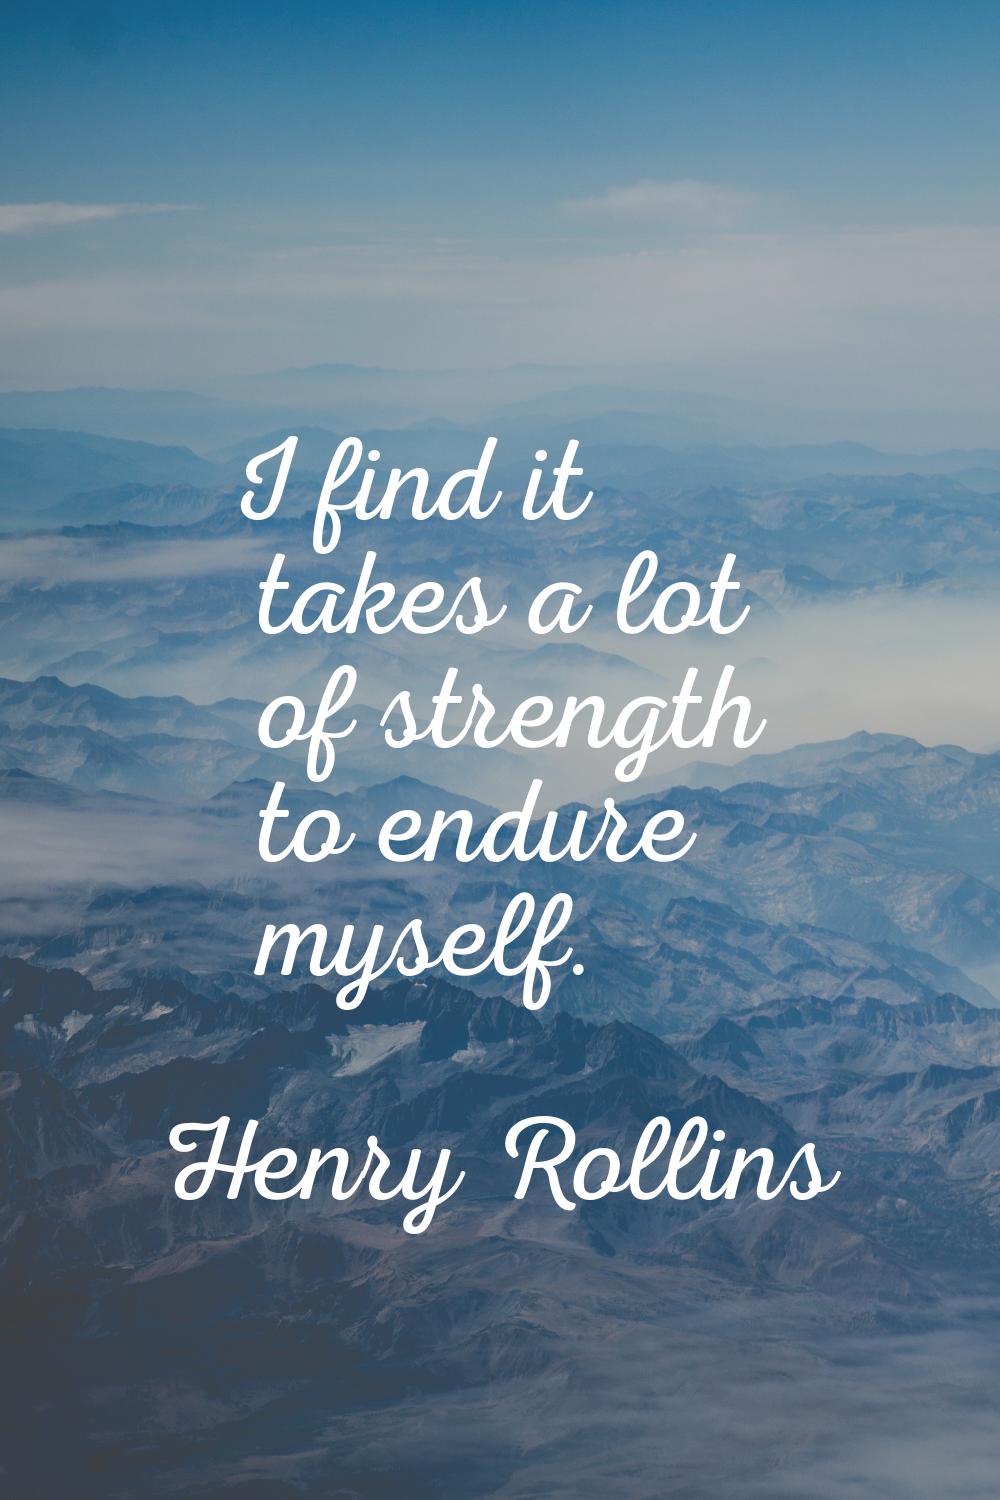 I find it takes a lot of strength to endure myself.